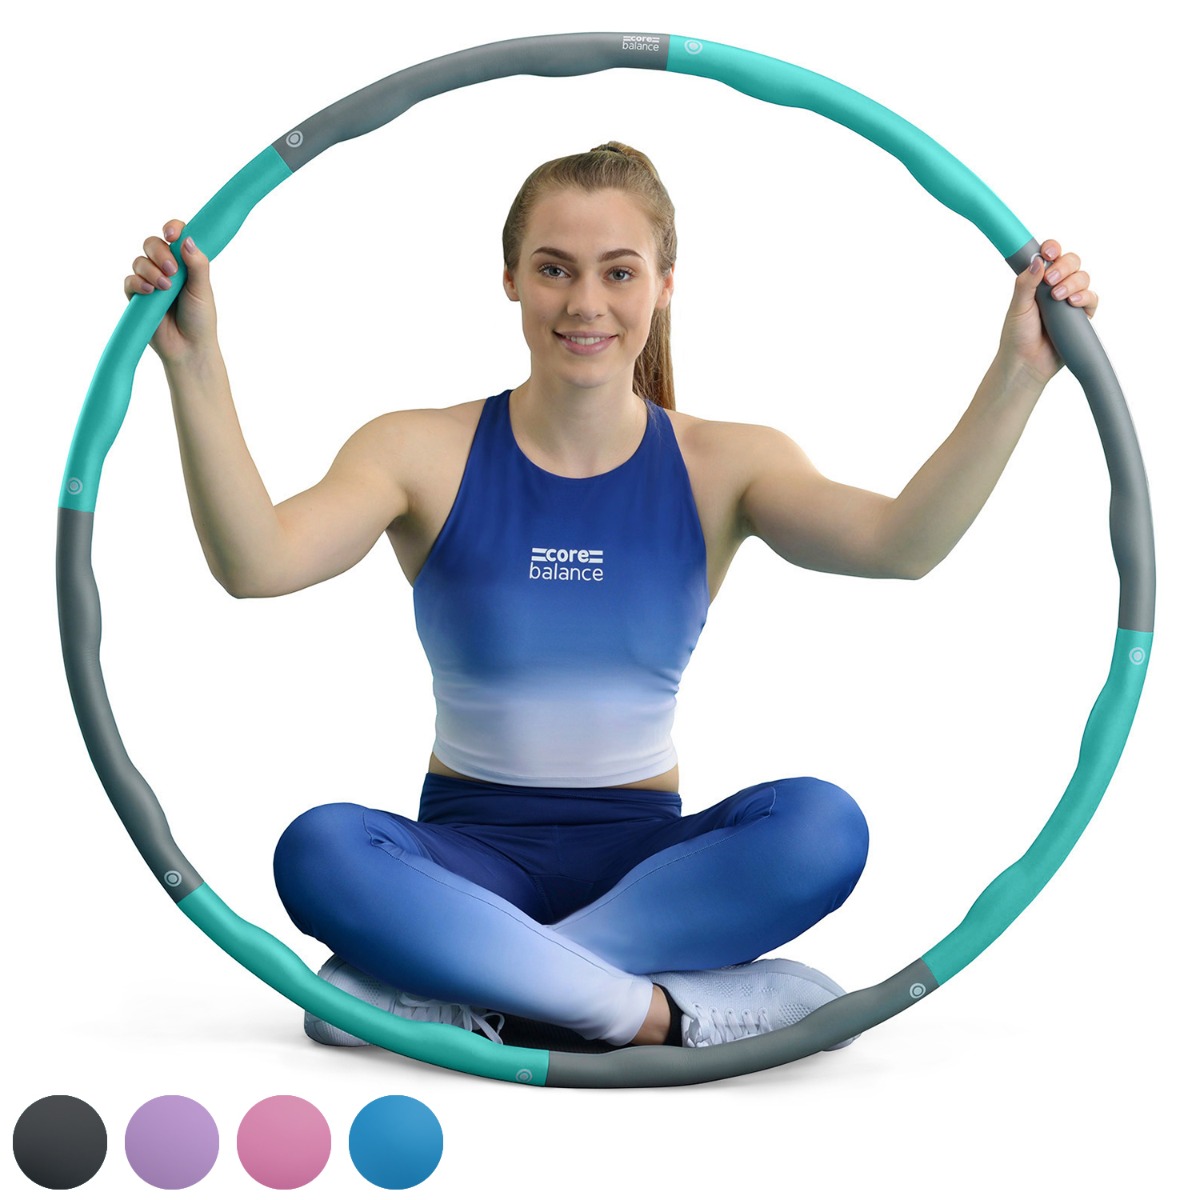 Weighted Hula Hoop Fitness Abs Exercise Workout Padded ...